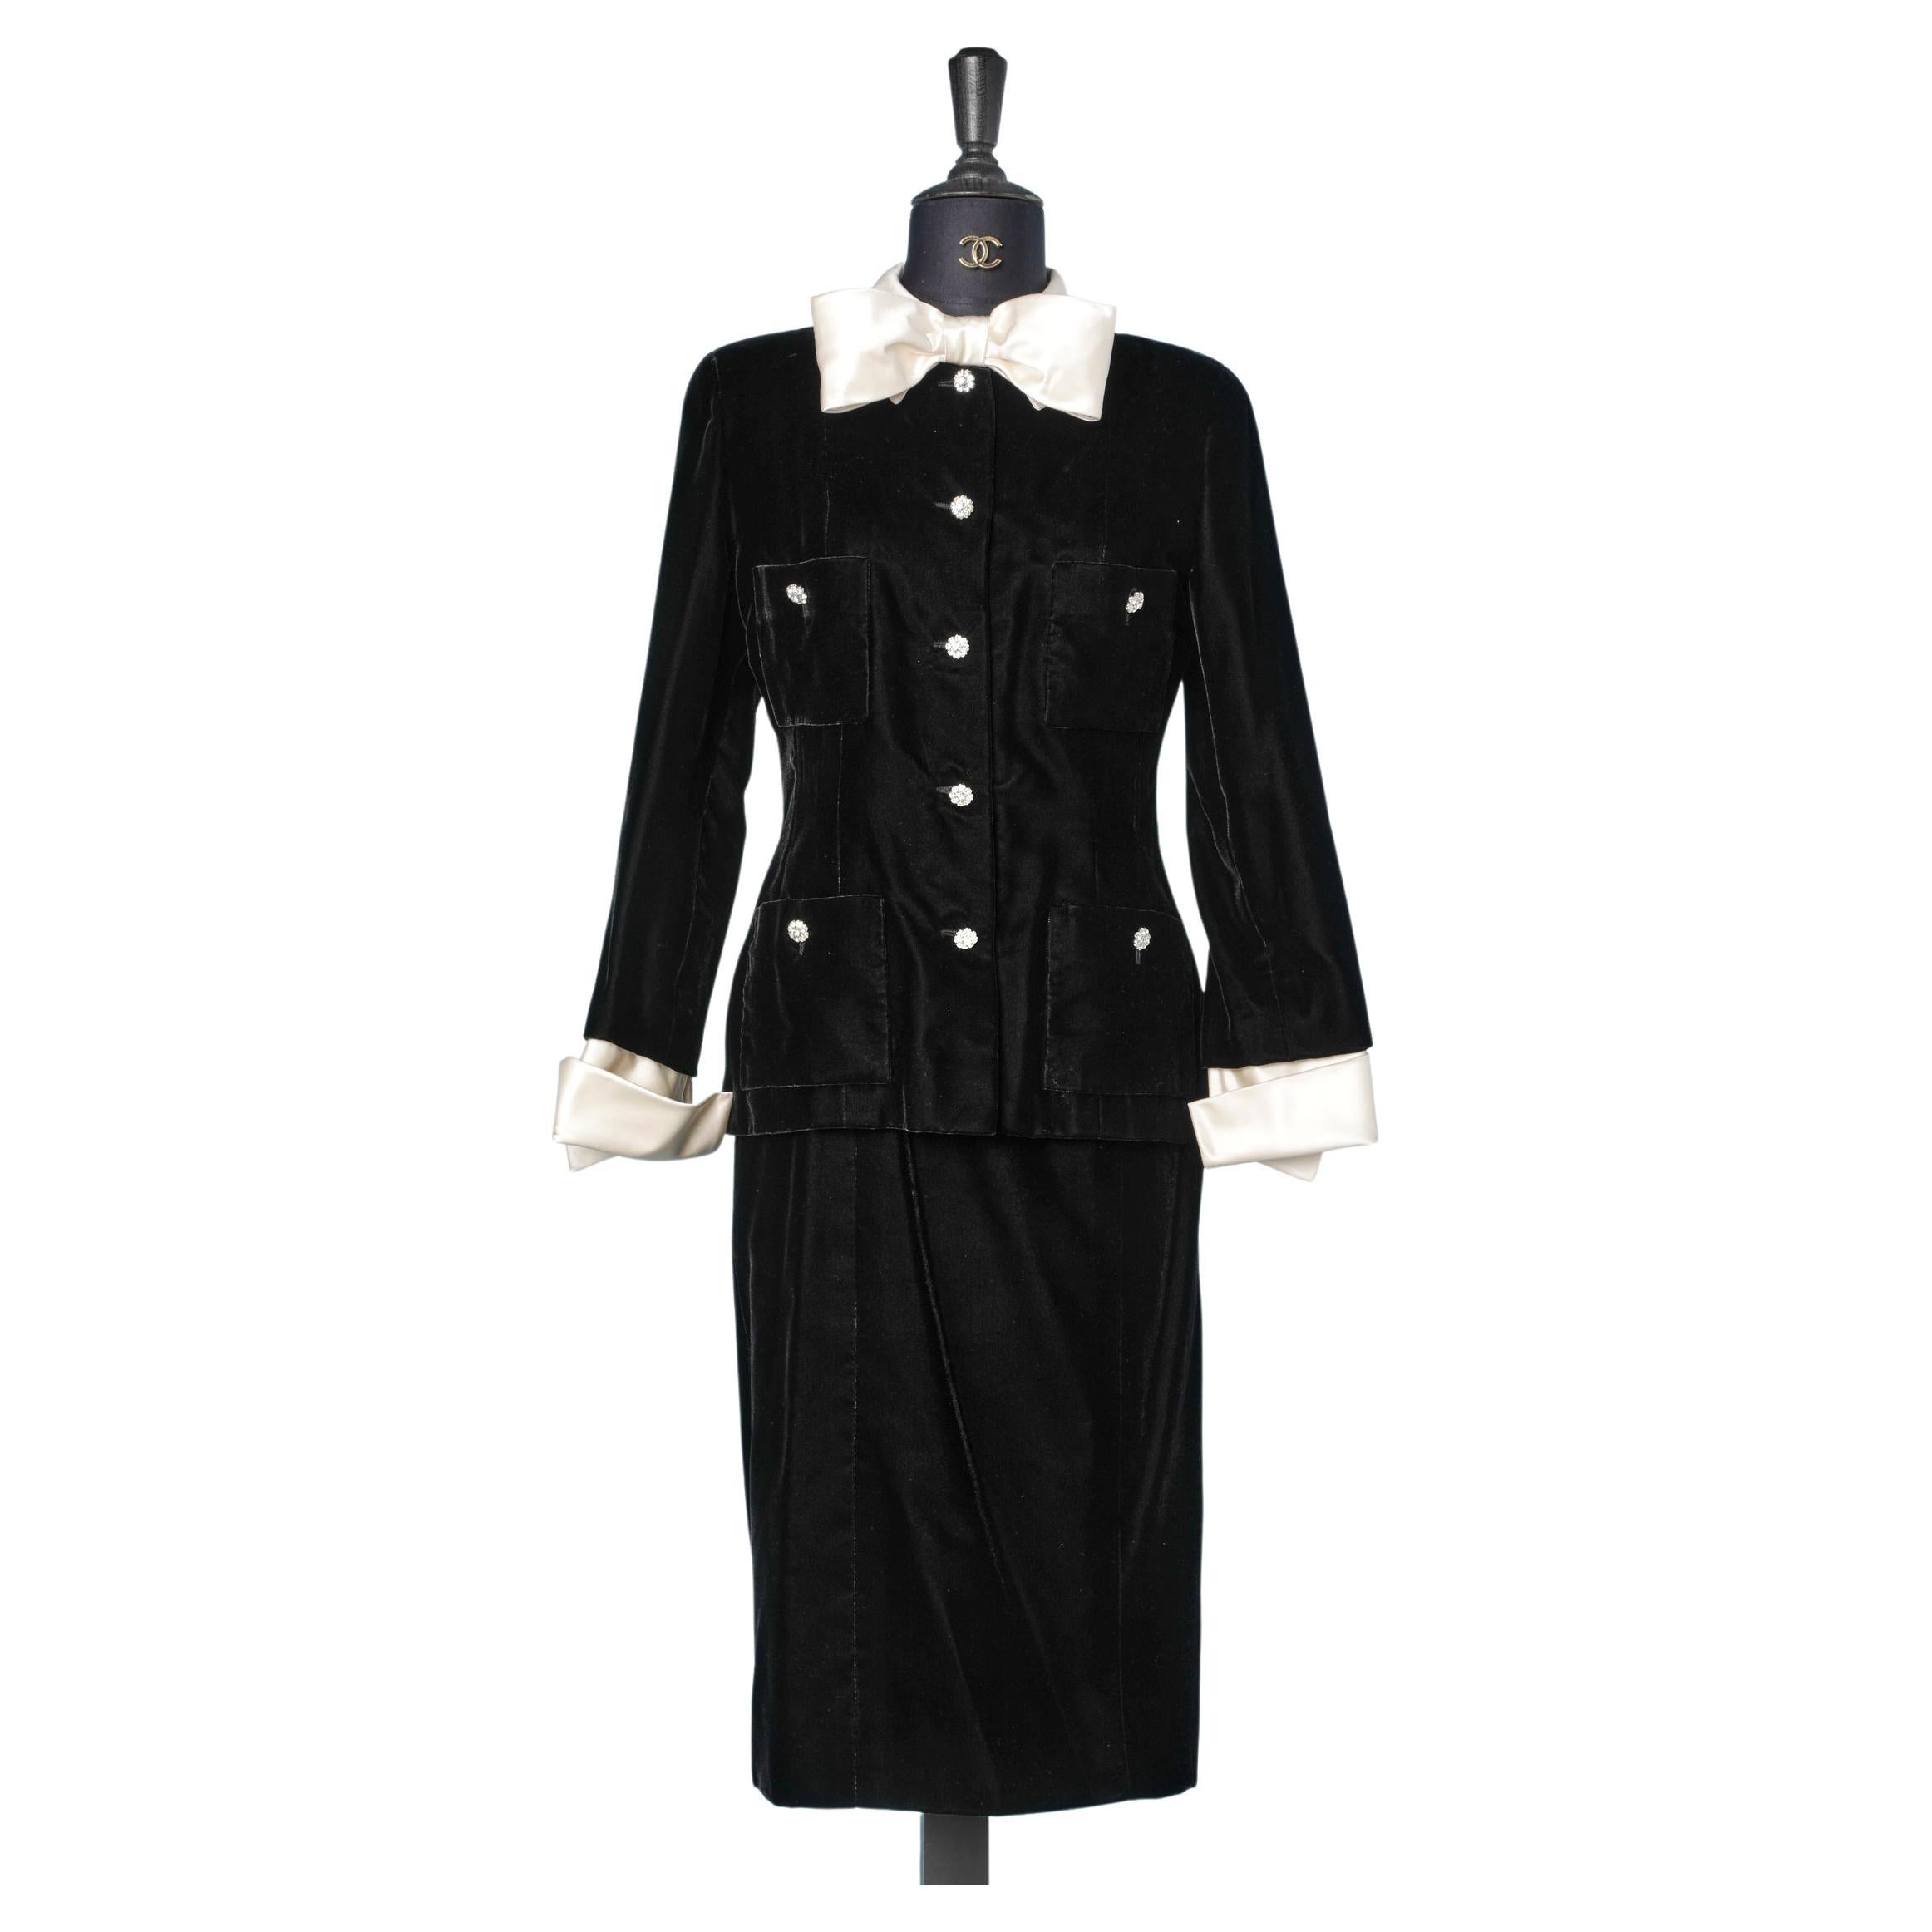 Black velvet skirt-suit with ivory silk collar and cuff Chanel Boutique  For Sale